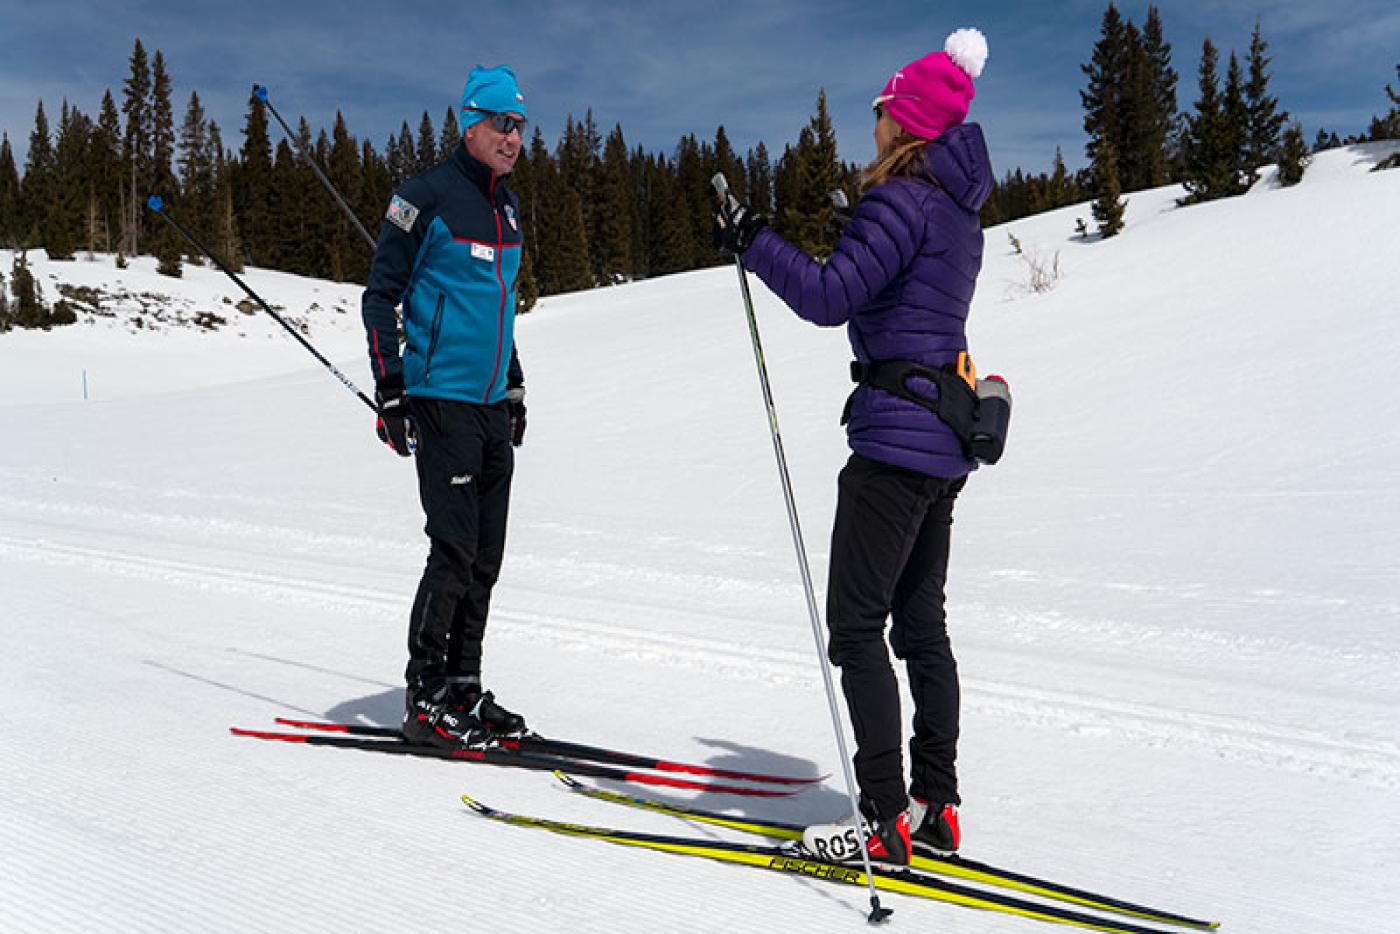 Mentoring of PSIA cross country ski instructors